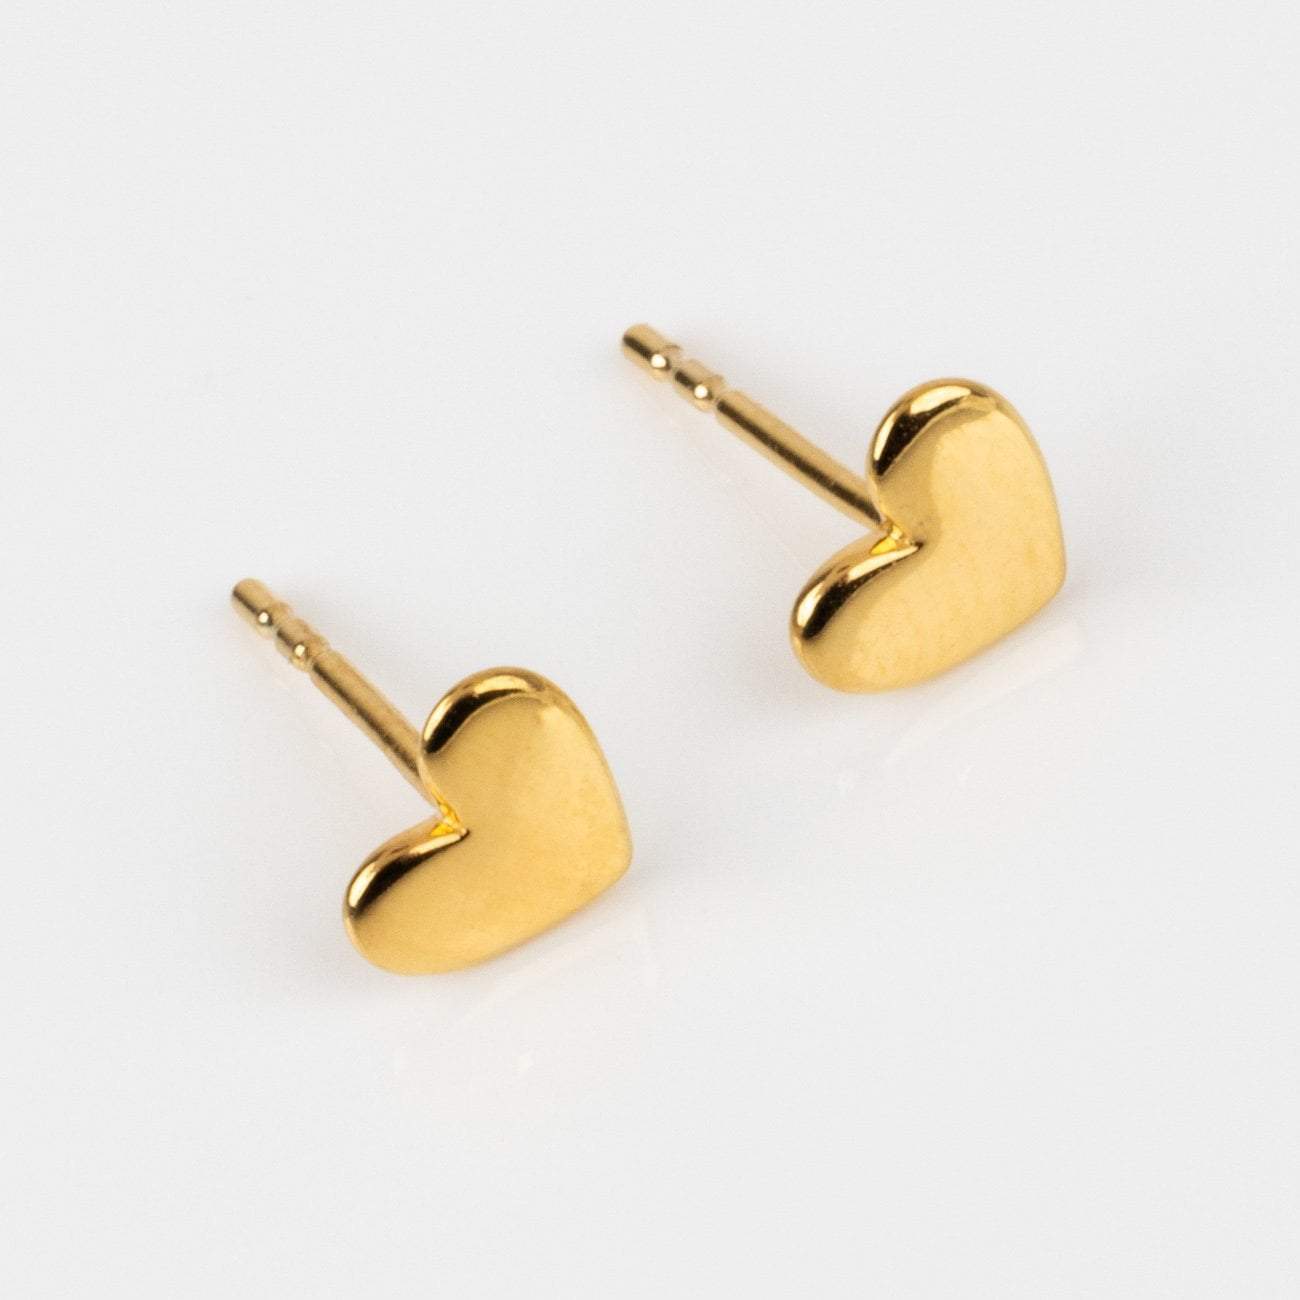 Solid Gold Heart Earrings – local eclectic